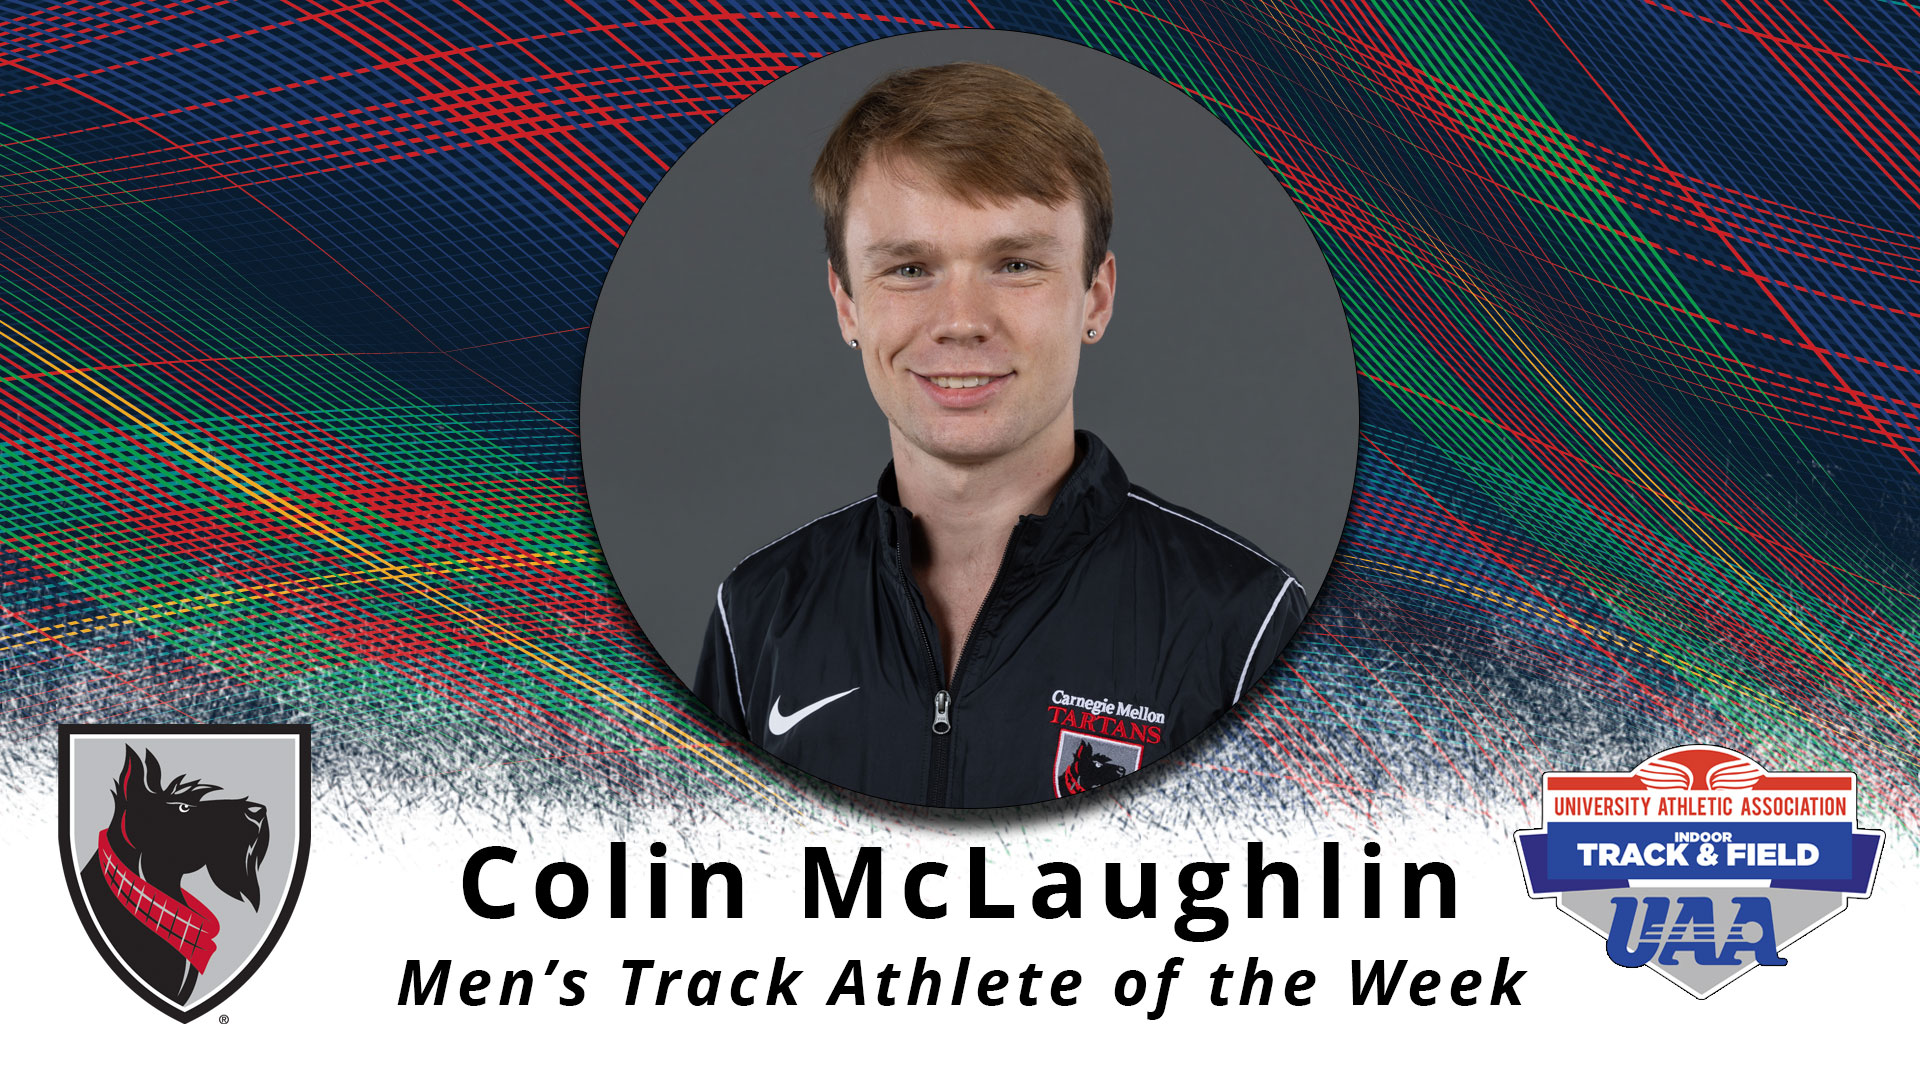 a portrait type photo of a male framed in a circle with text reading Colin McLaughlin Men's Track Athlete of the Week